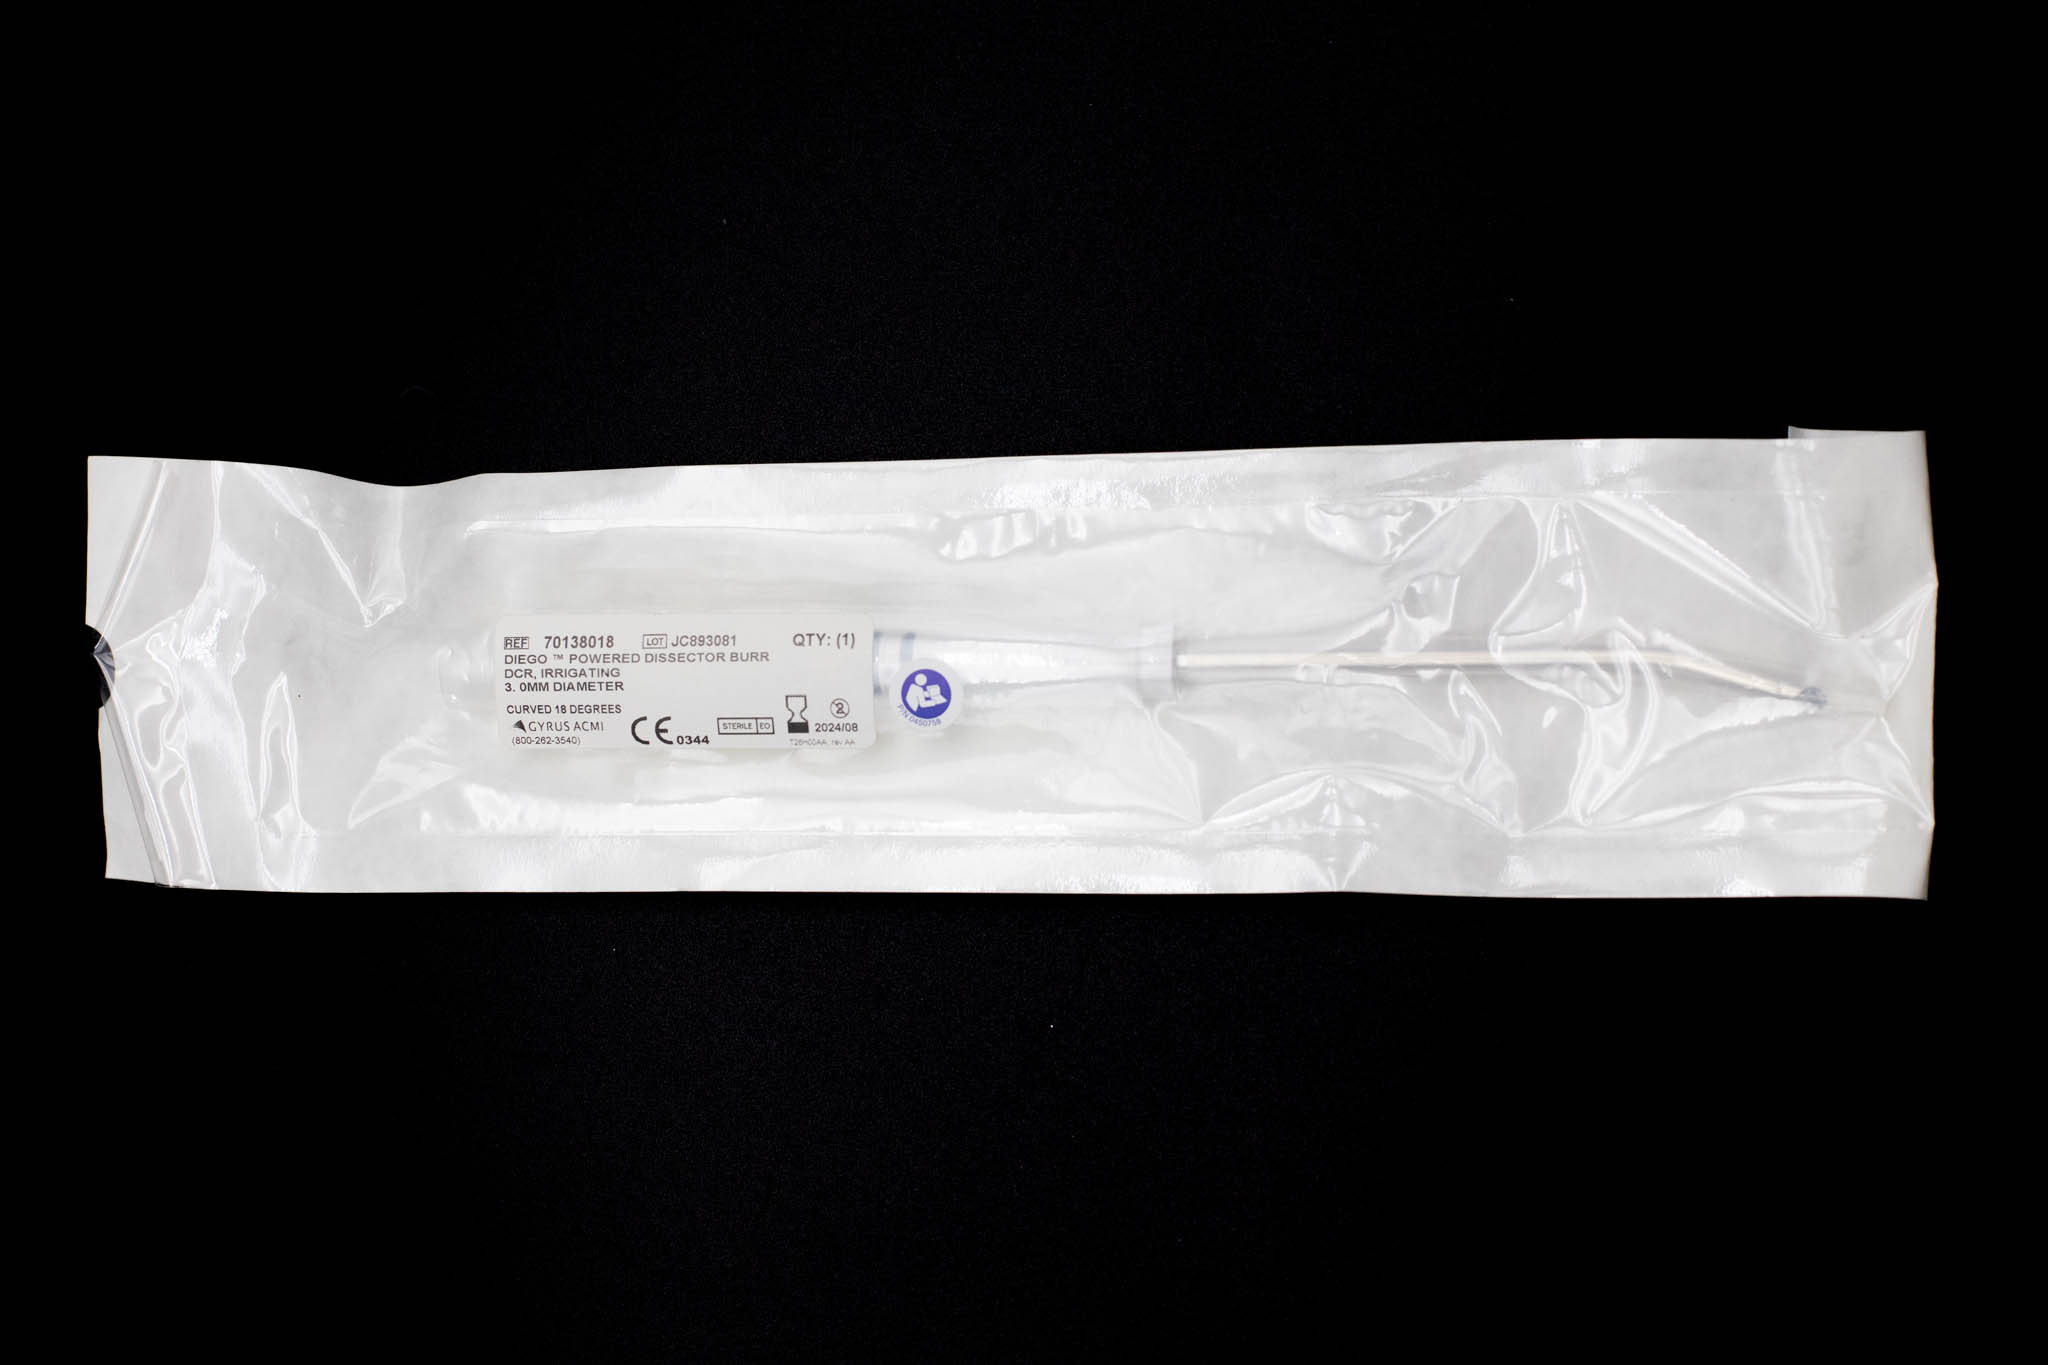 Disposable Diego Powered Dissector Burr, DCR, Irrigating, 3mm Dia, Curved 18deg - 70138018 [1/Bag]